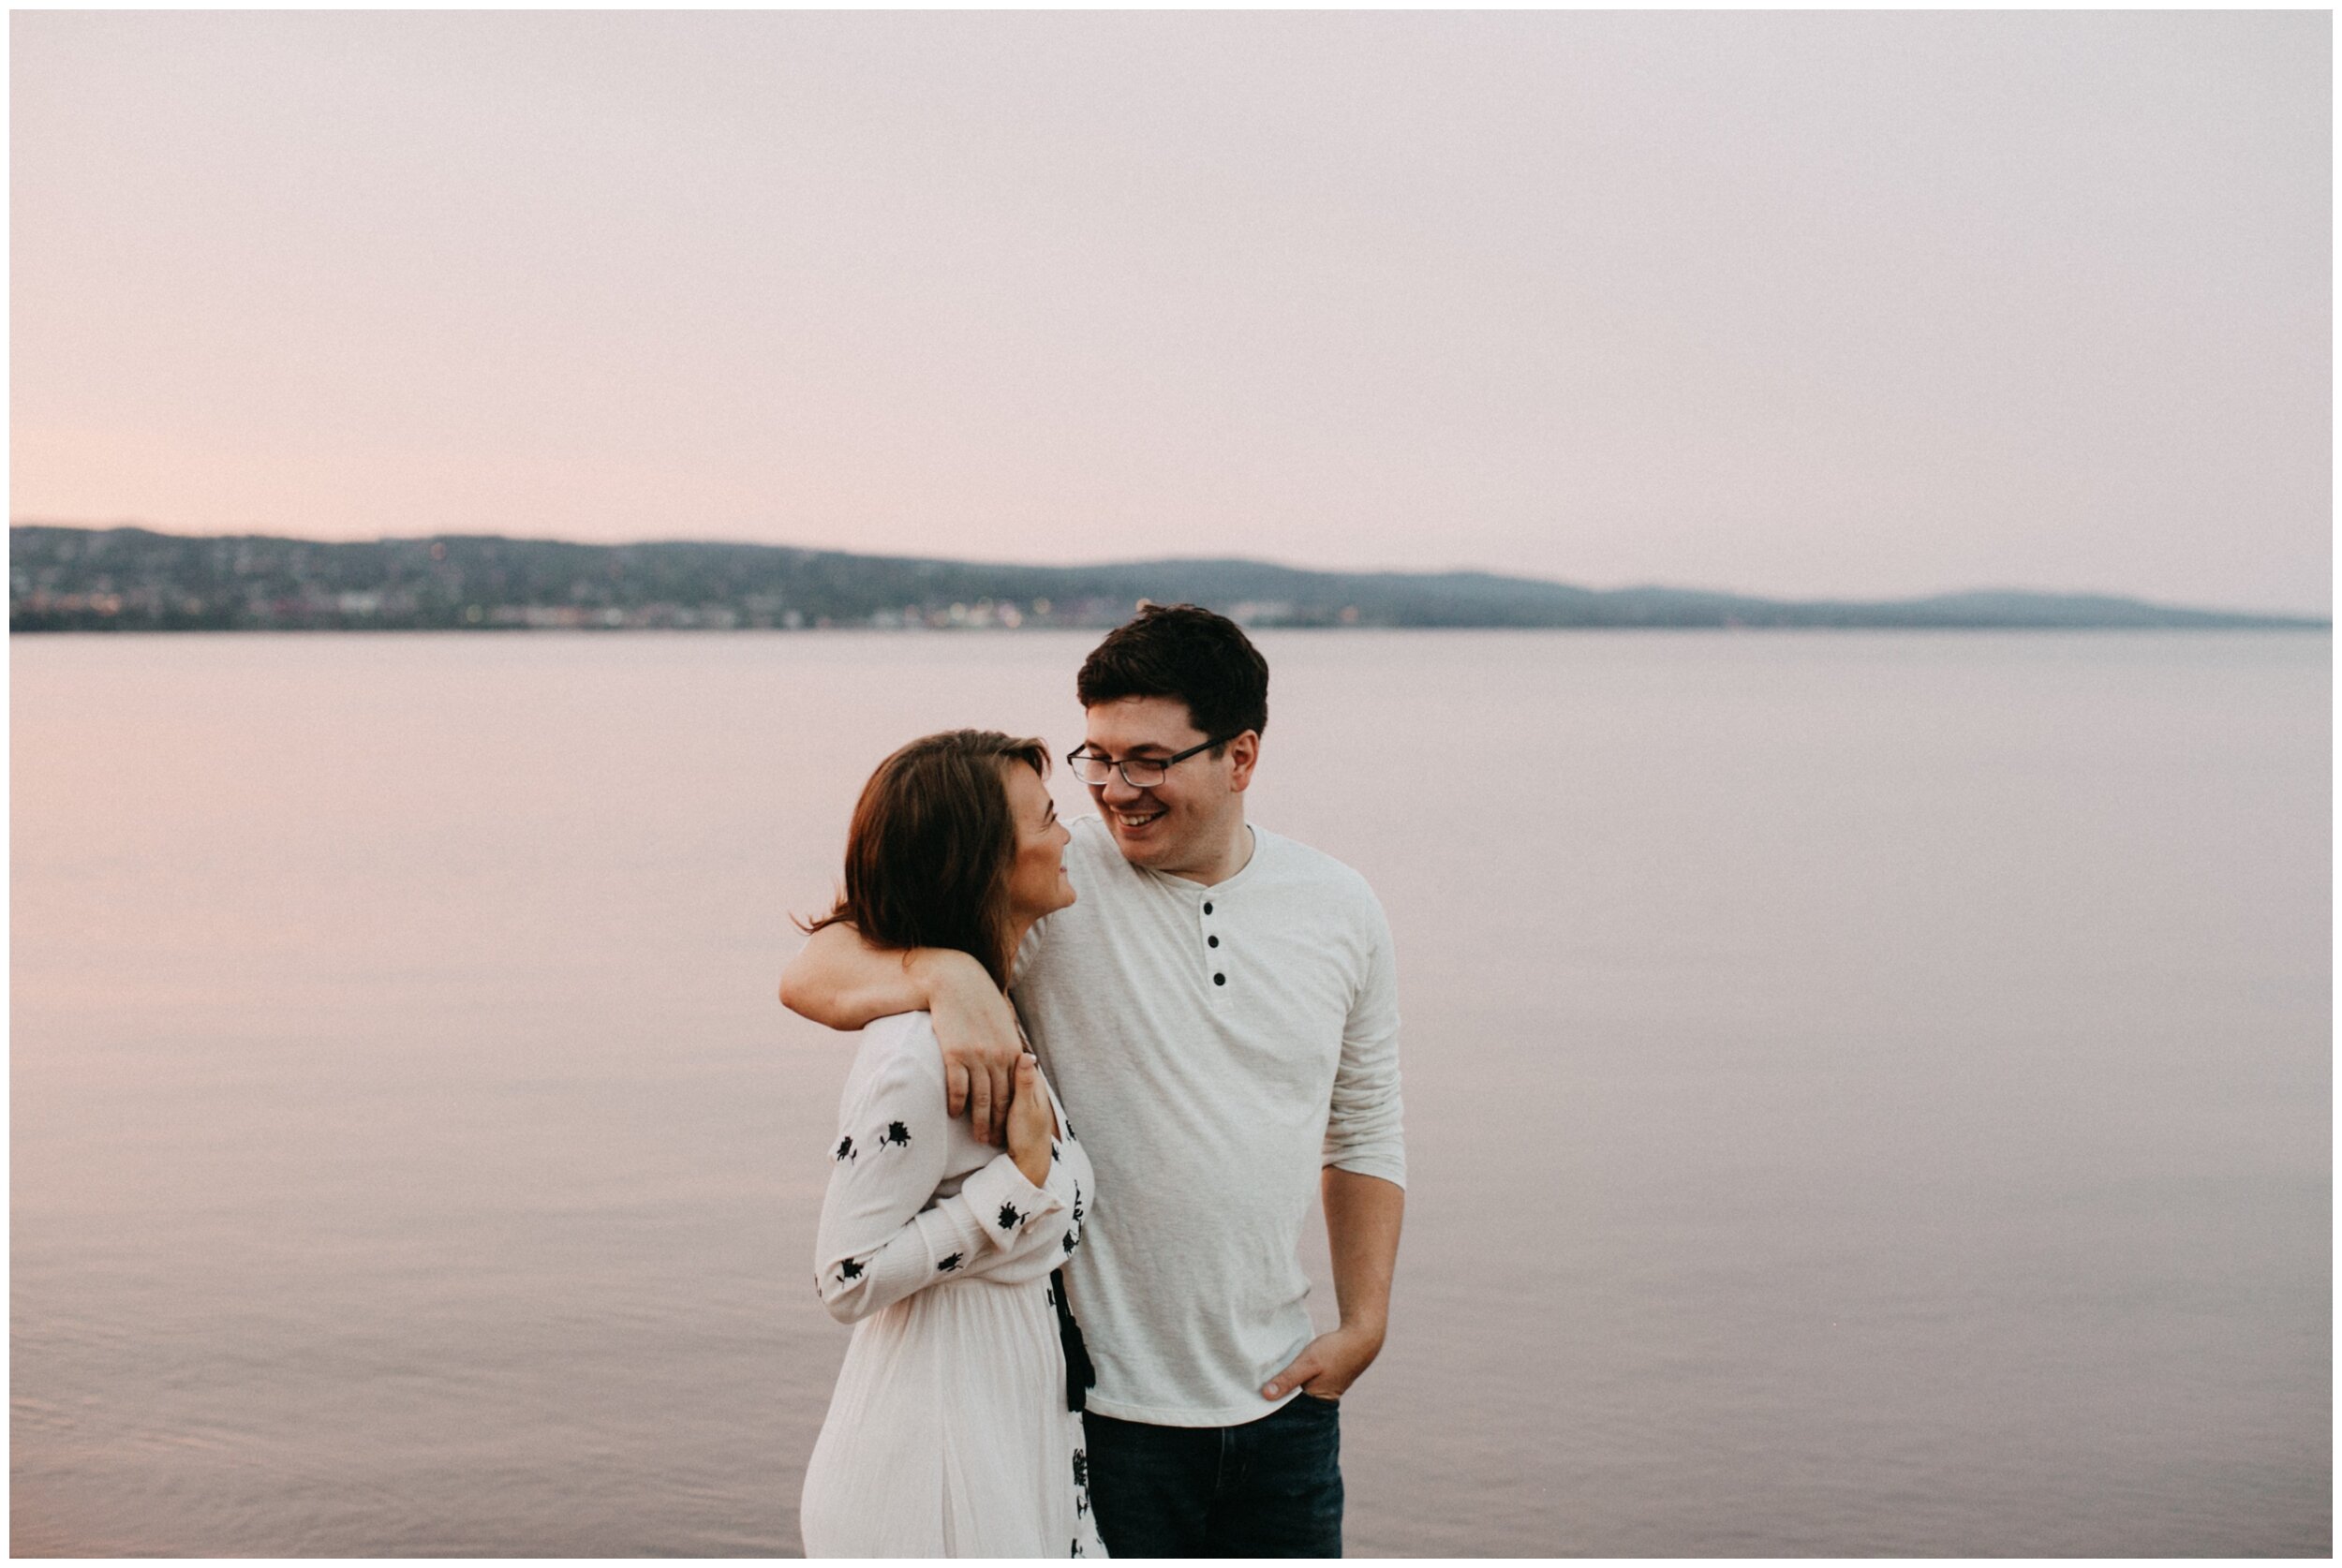 North shore Minnesota engagement session during sunset